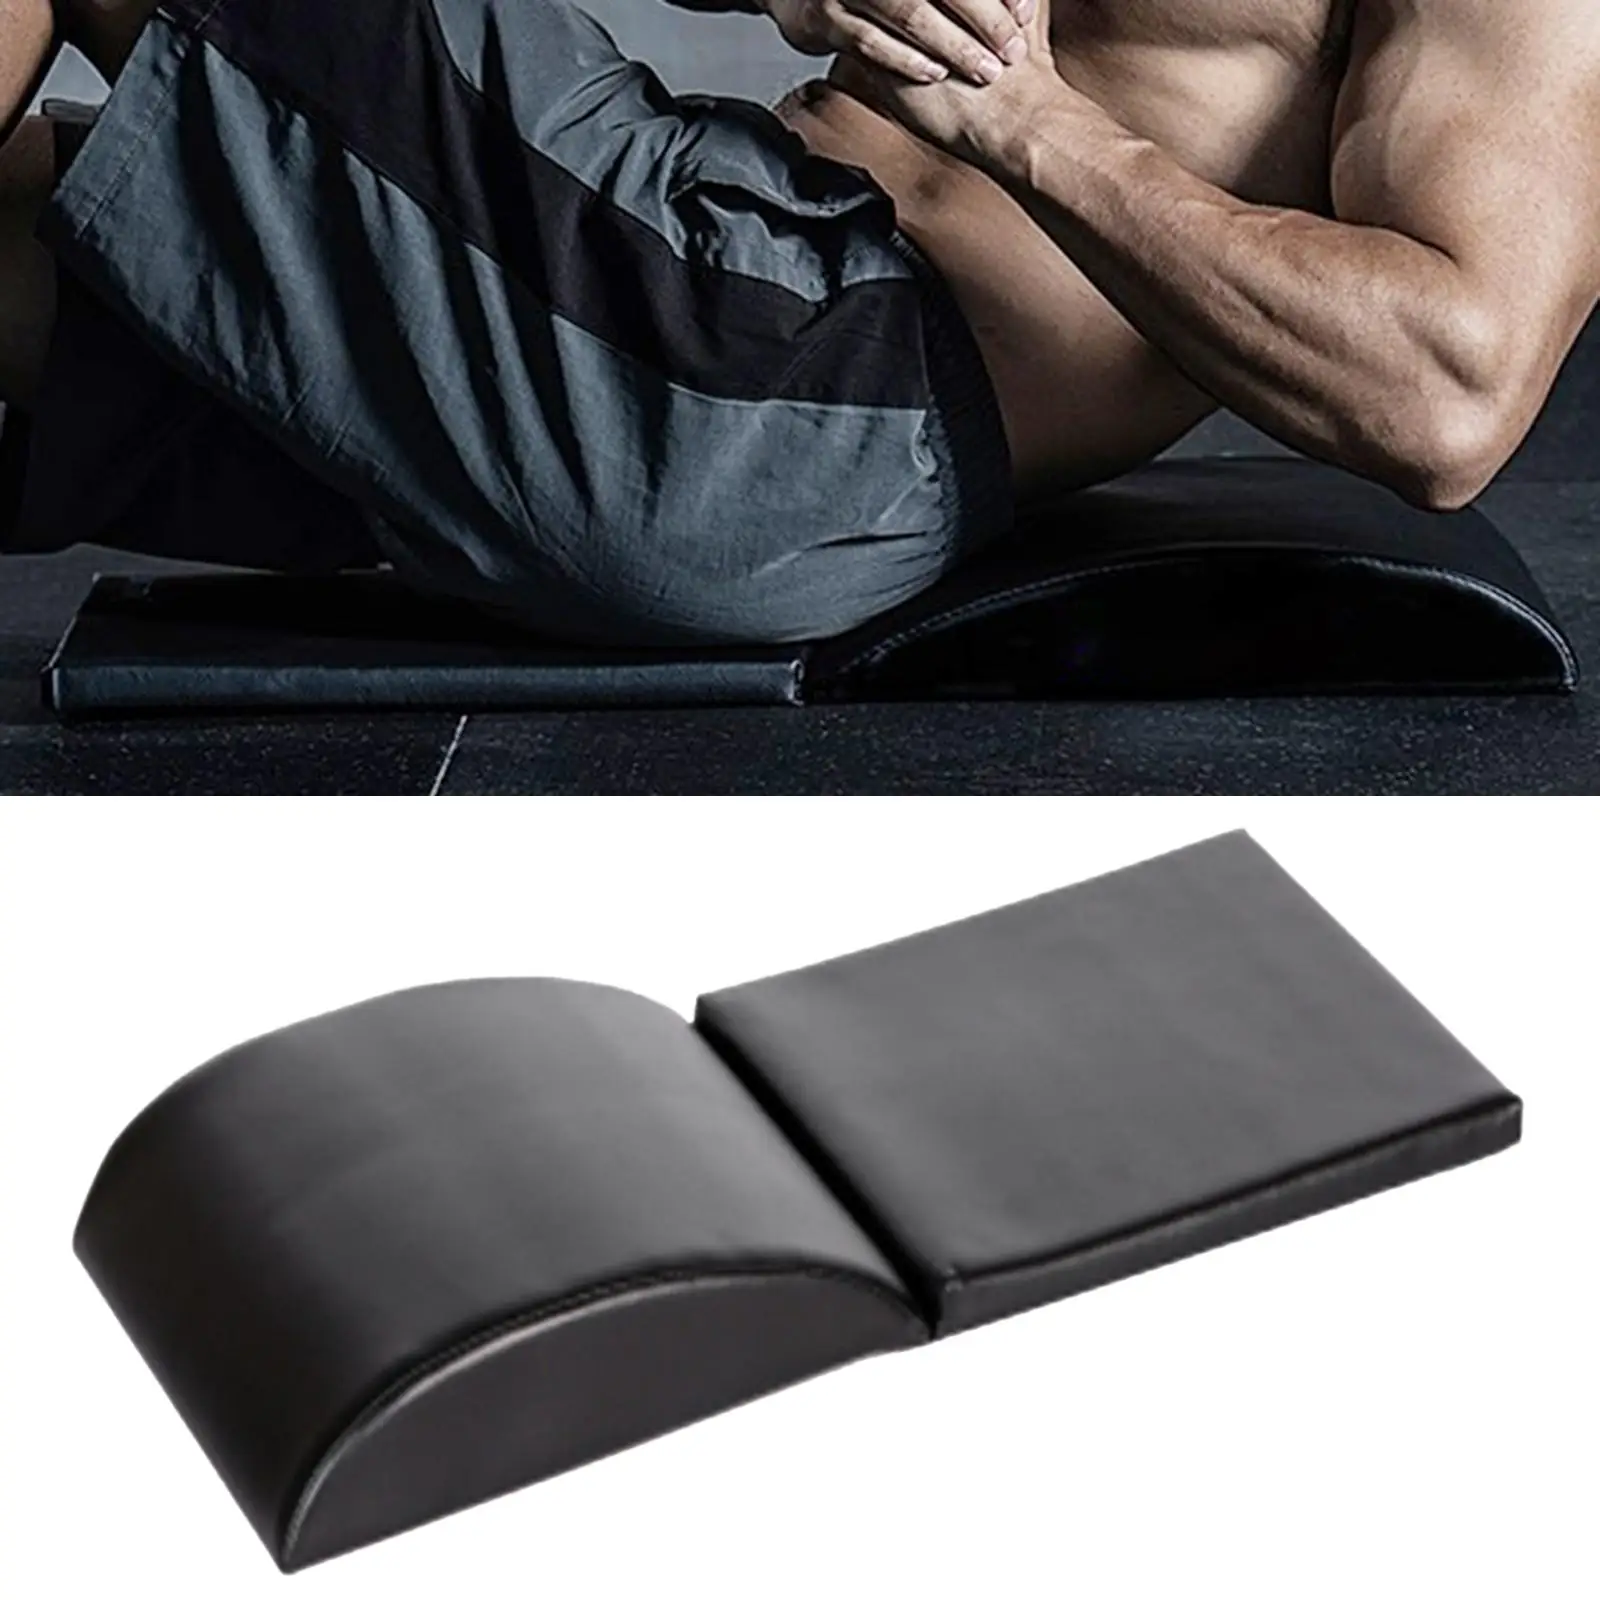 Ab Exercise Mat Abdominal Trainer Pad Stretches Muscles Support